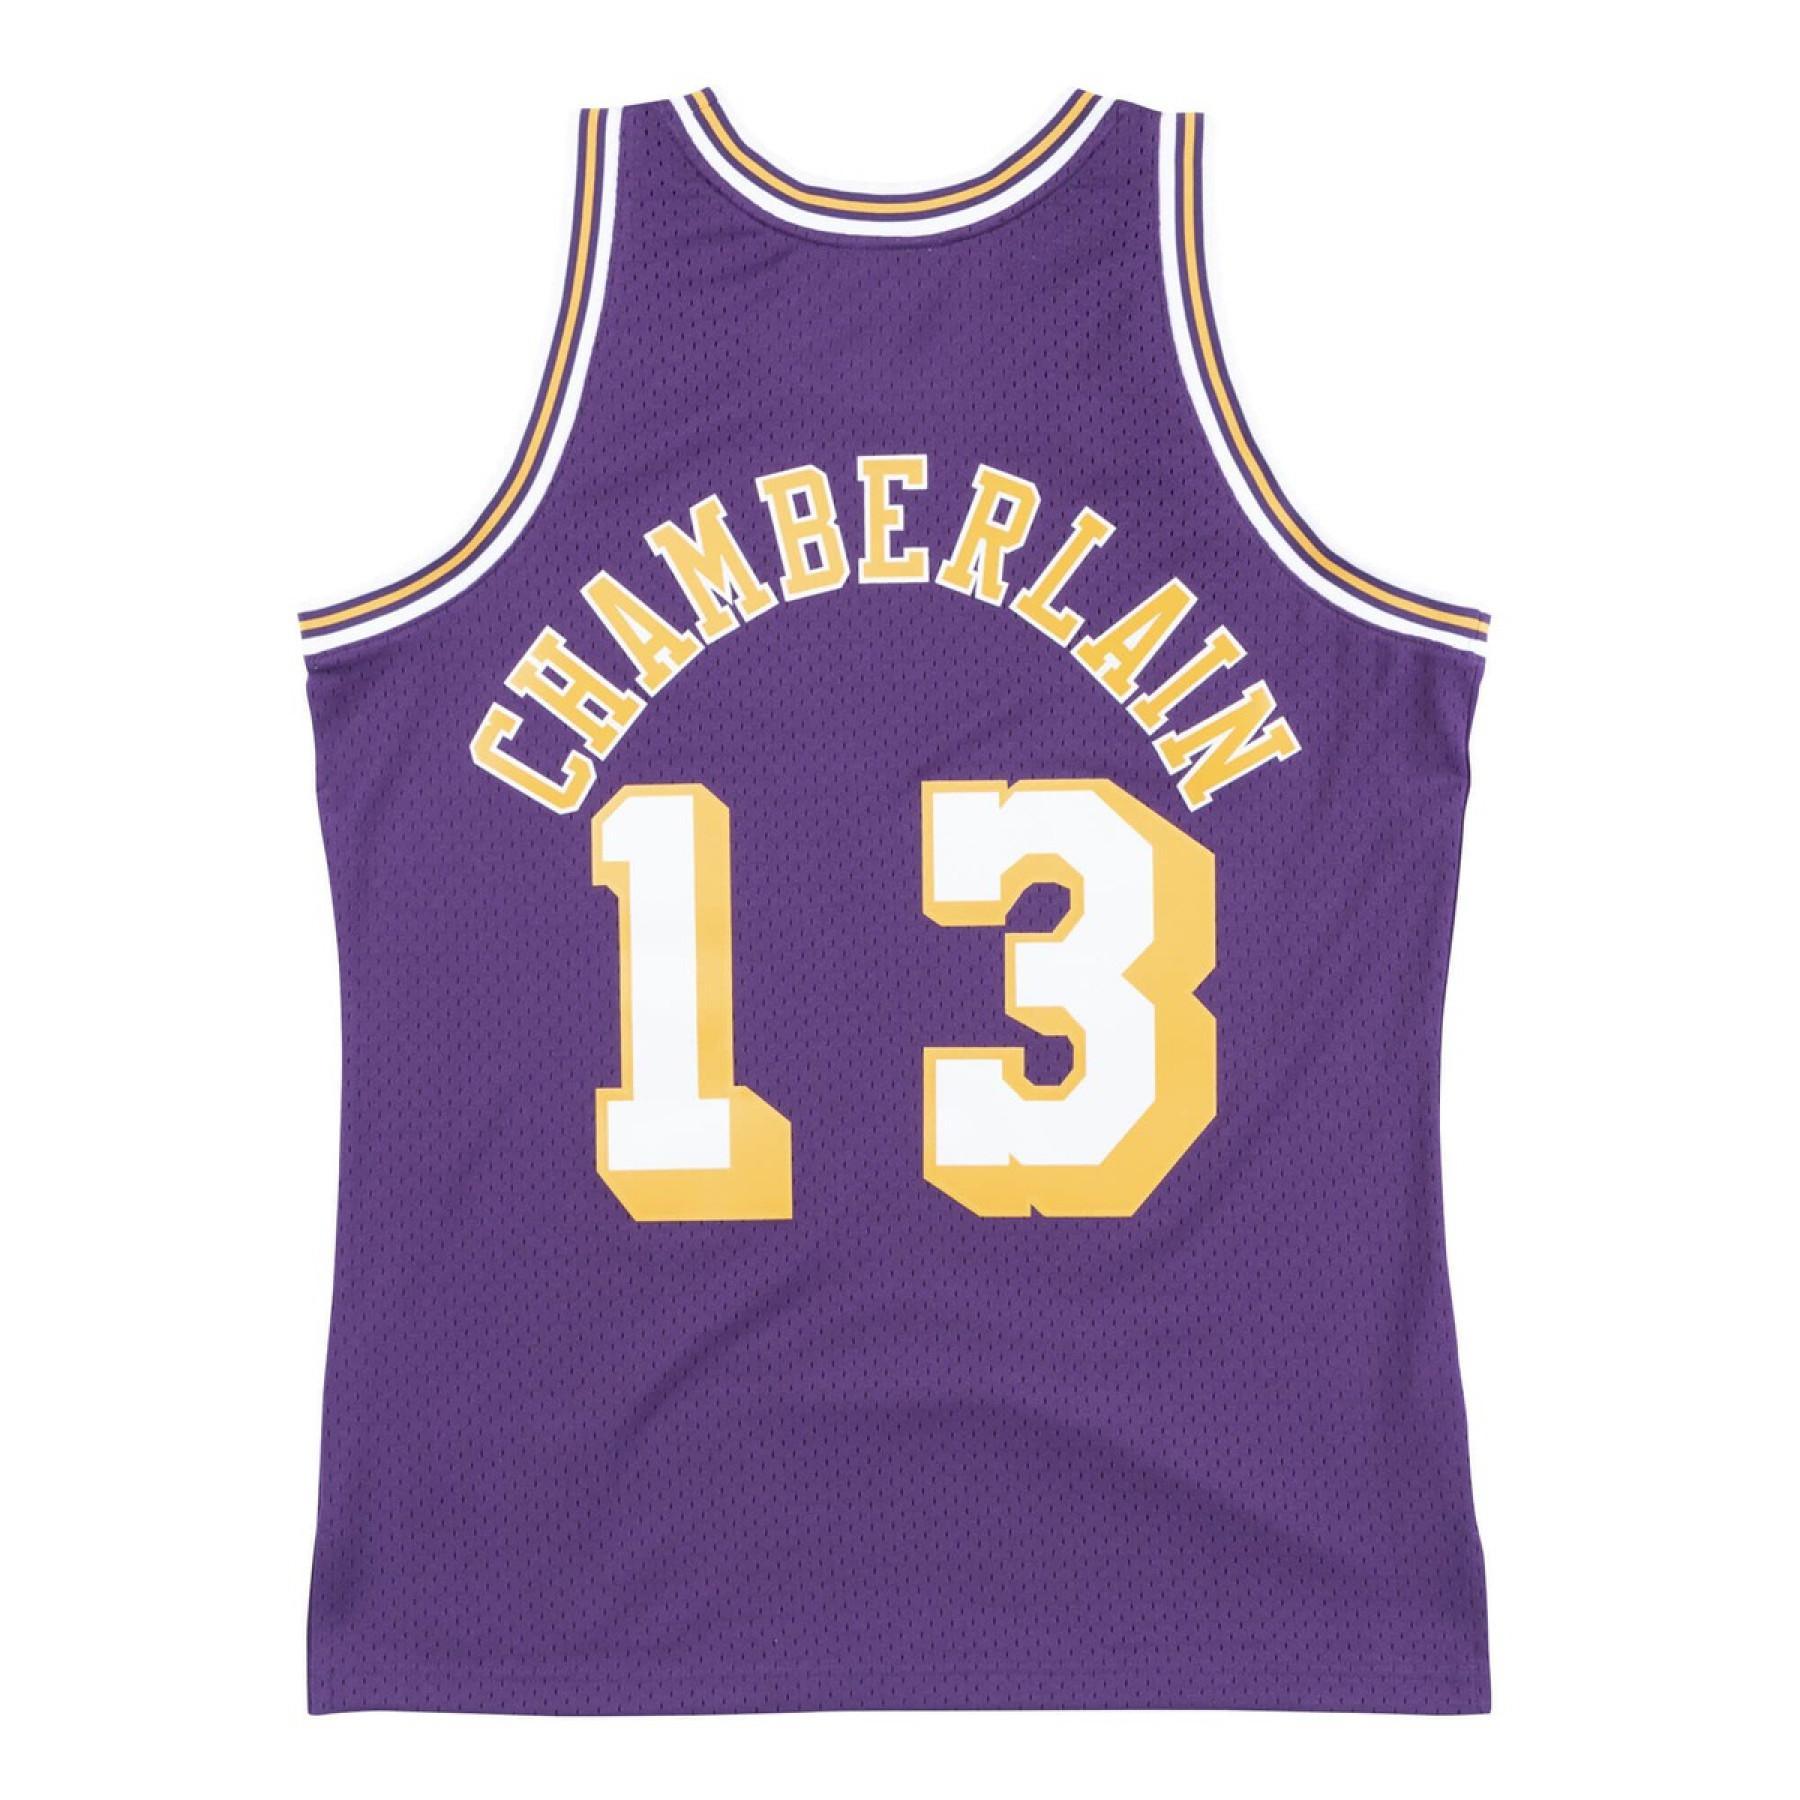 Camisola Mitchell & Ness Nba Los Angeles Lakers